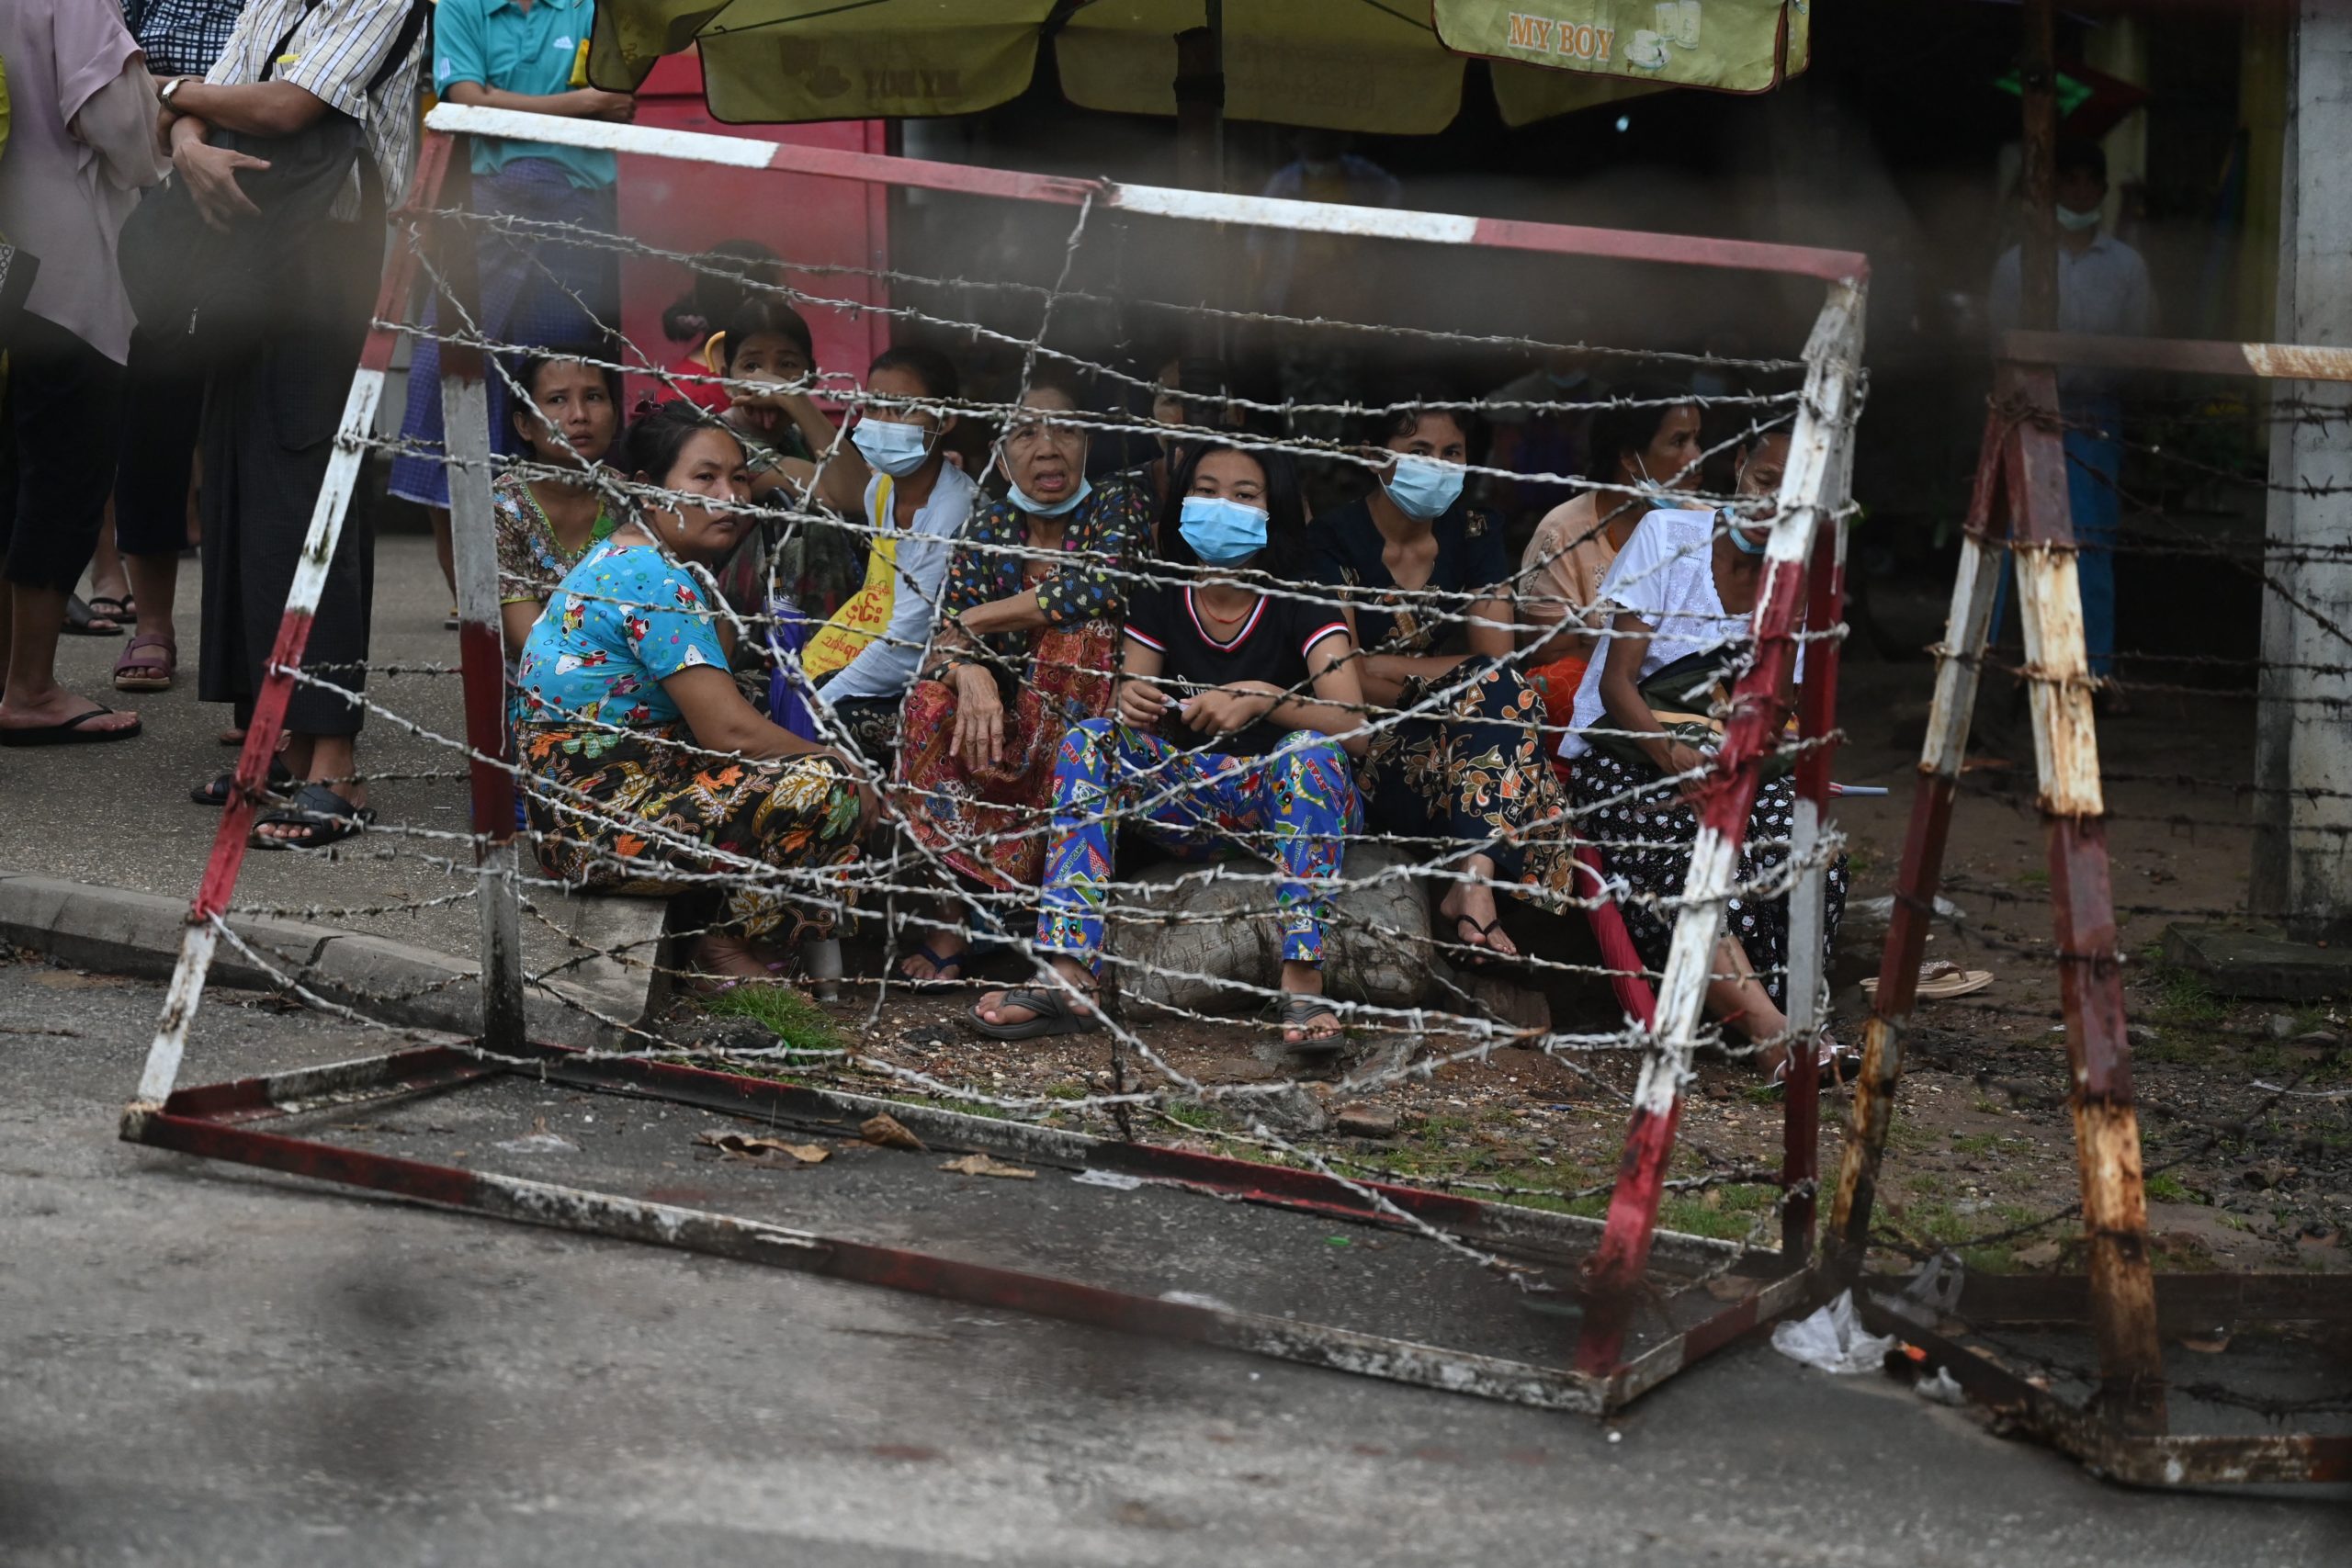 People wait outside Insein Prison in Yangon on October 18, 2021, as authorities announced more than 5,000 people jailed for protesting against a February coup which ousted the civilian government would be released. (Photo by AFP) (Photo by STR/AFP via Getty Images)